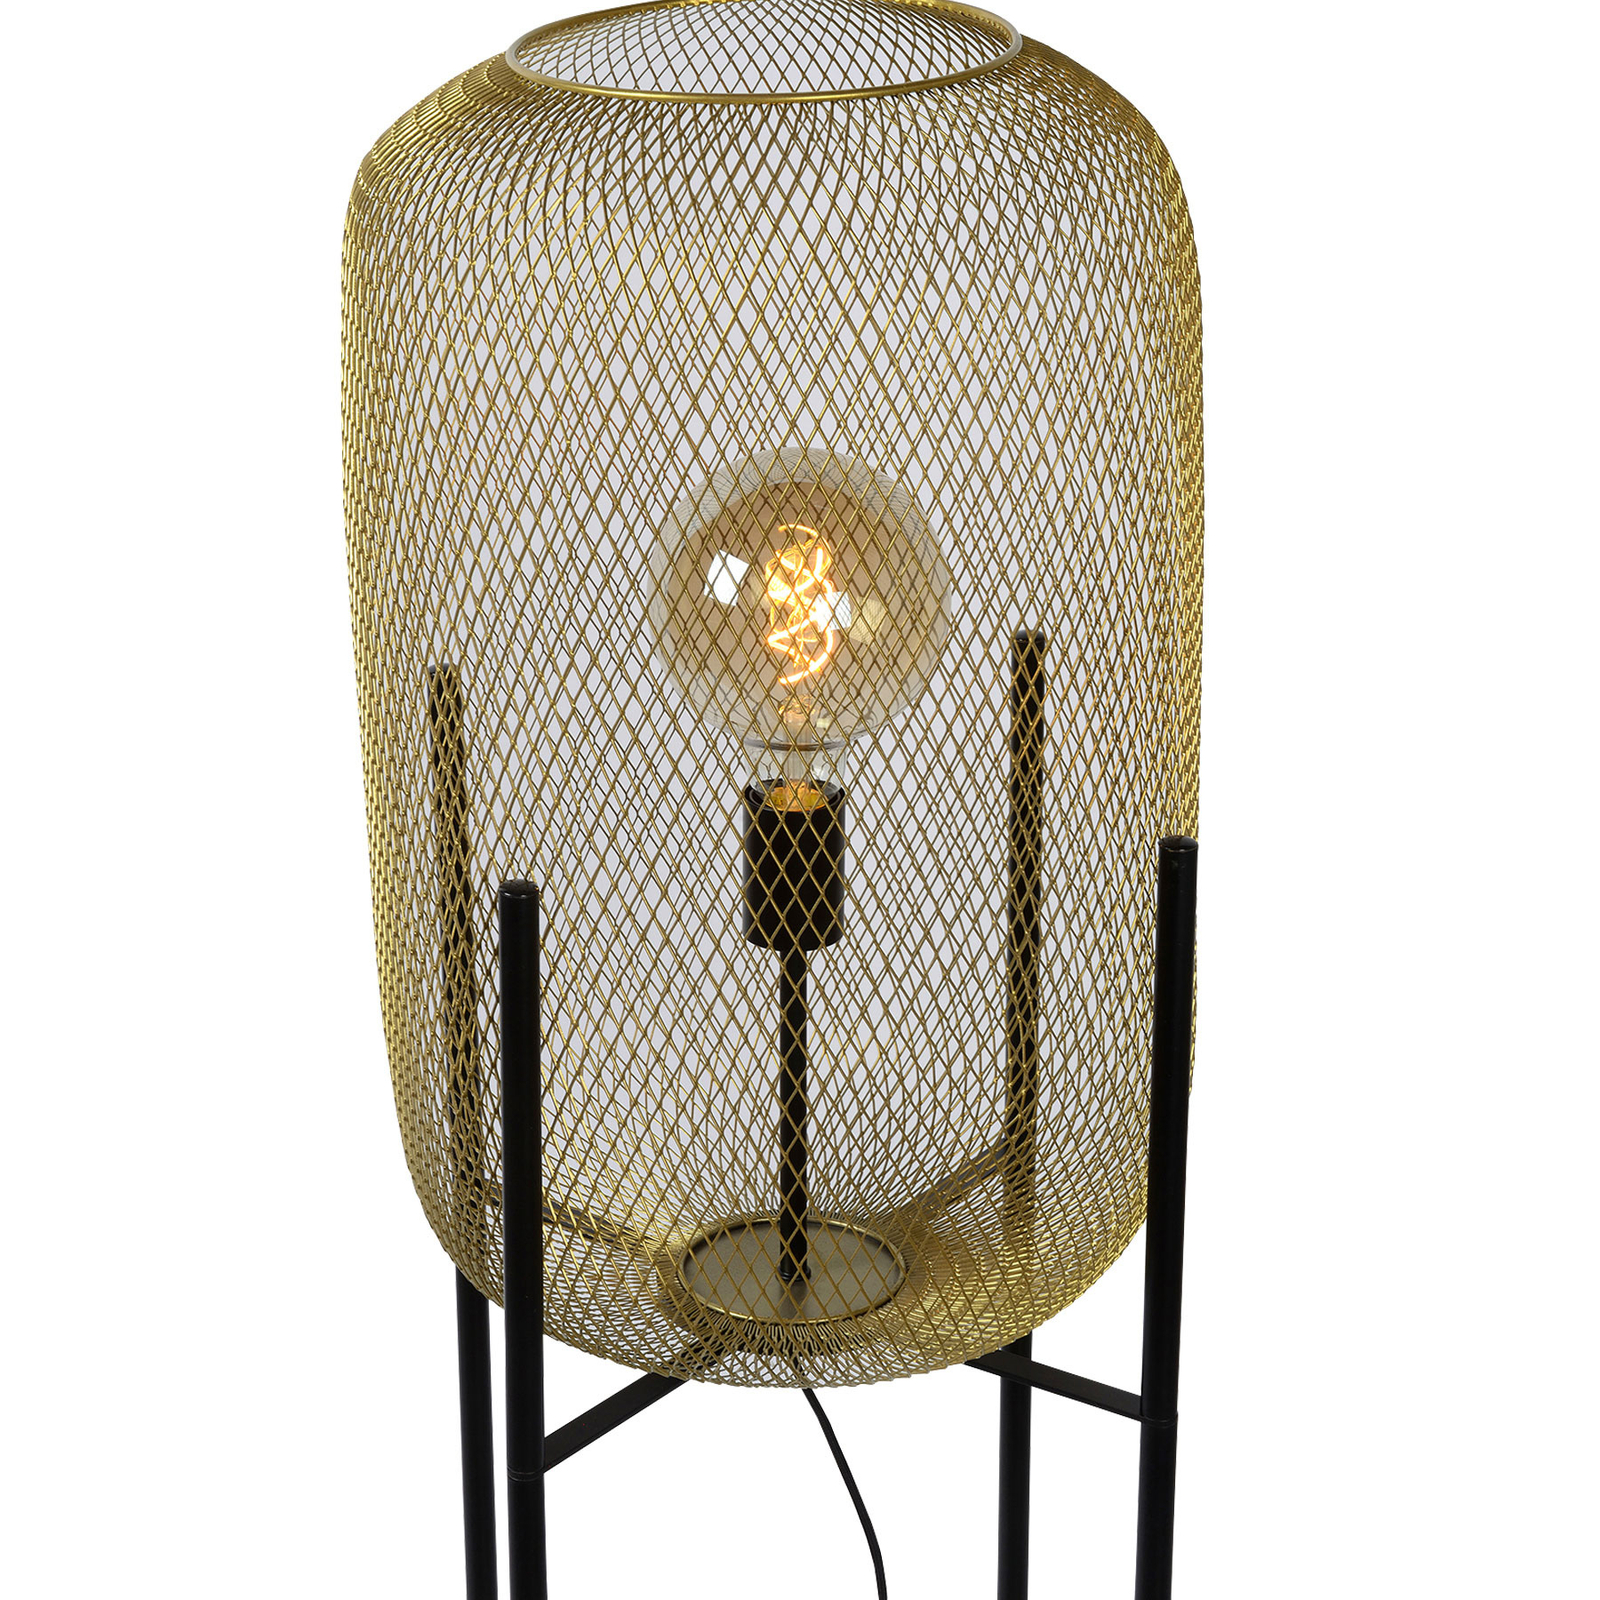 Mesh floor lamp with four legs, gold